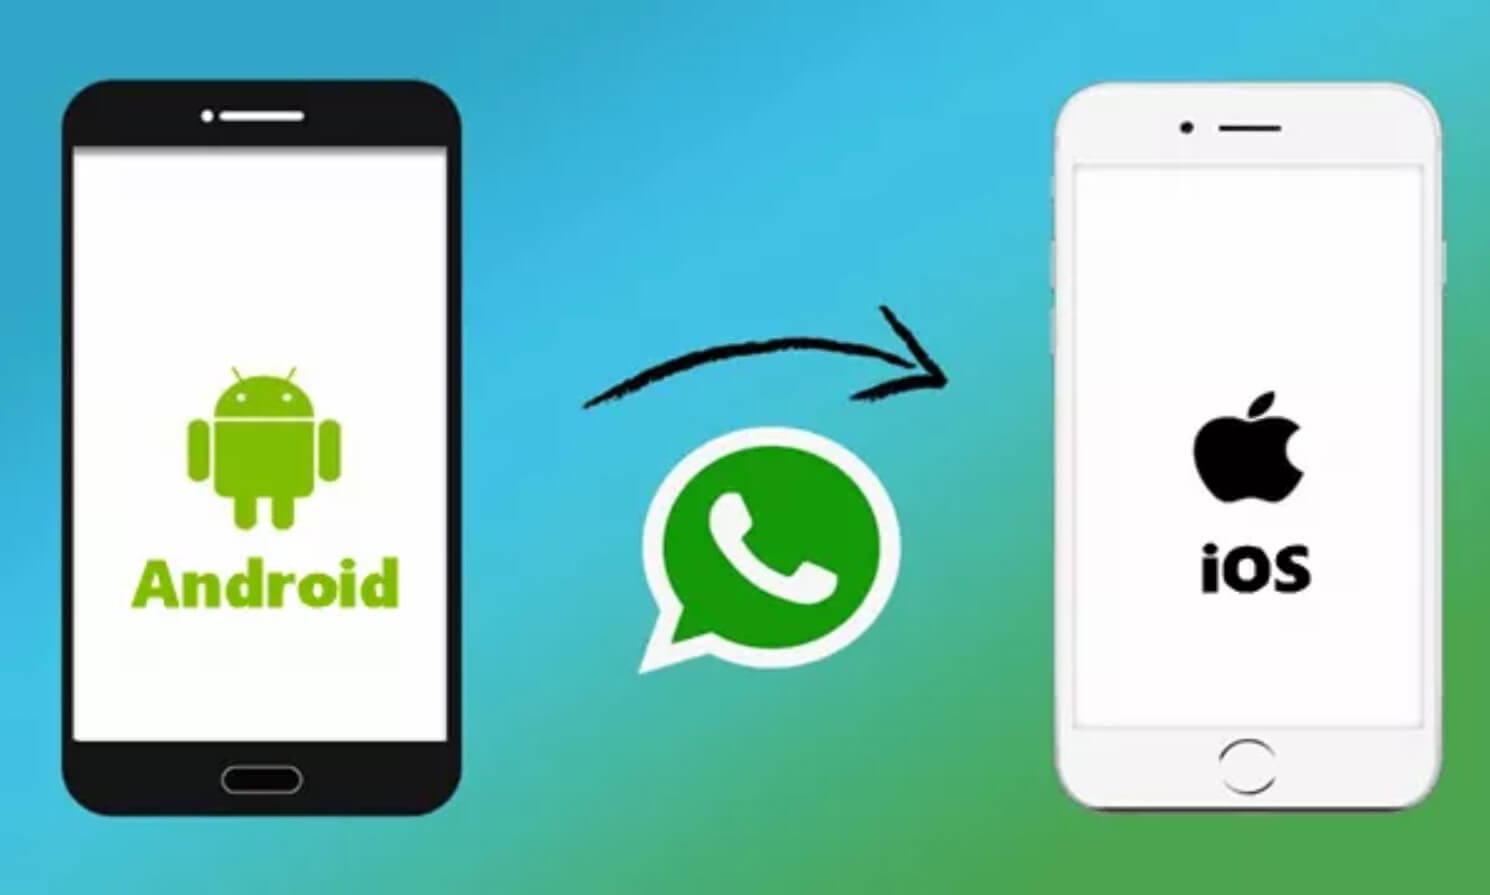 [Android & iOS] How to Transfer WhatsApp Messages from Android to iPhone?